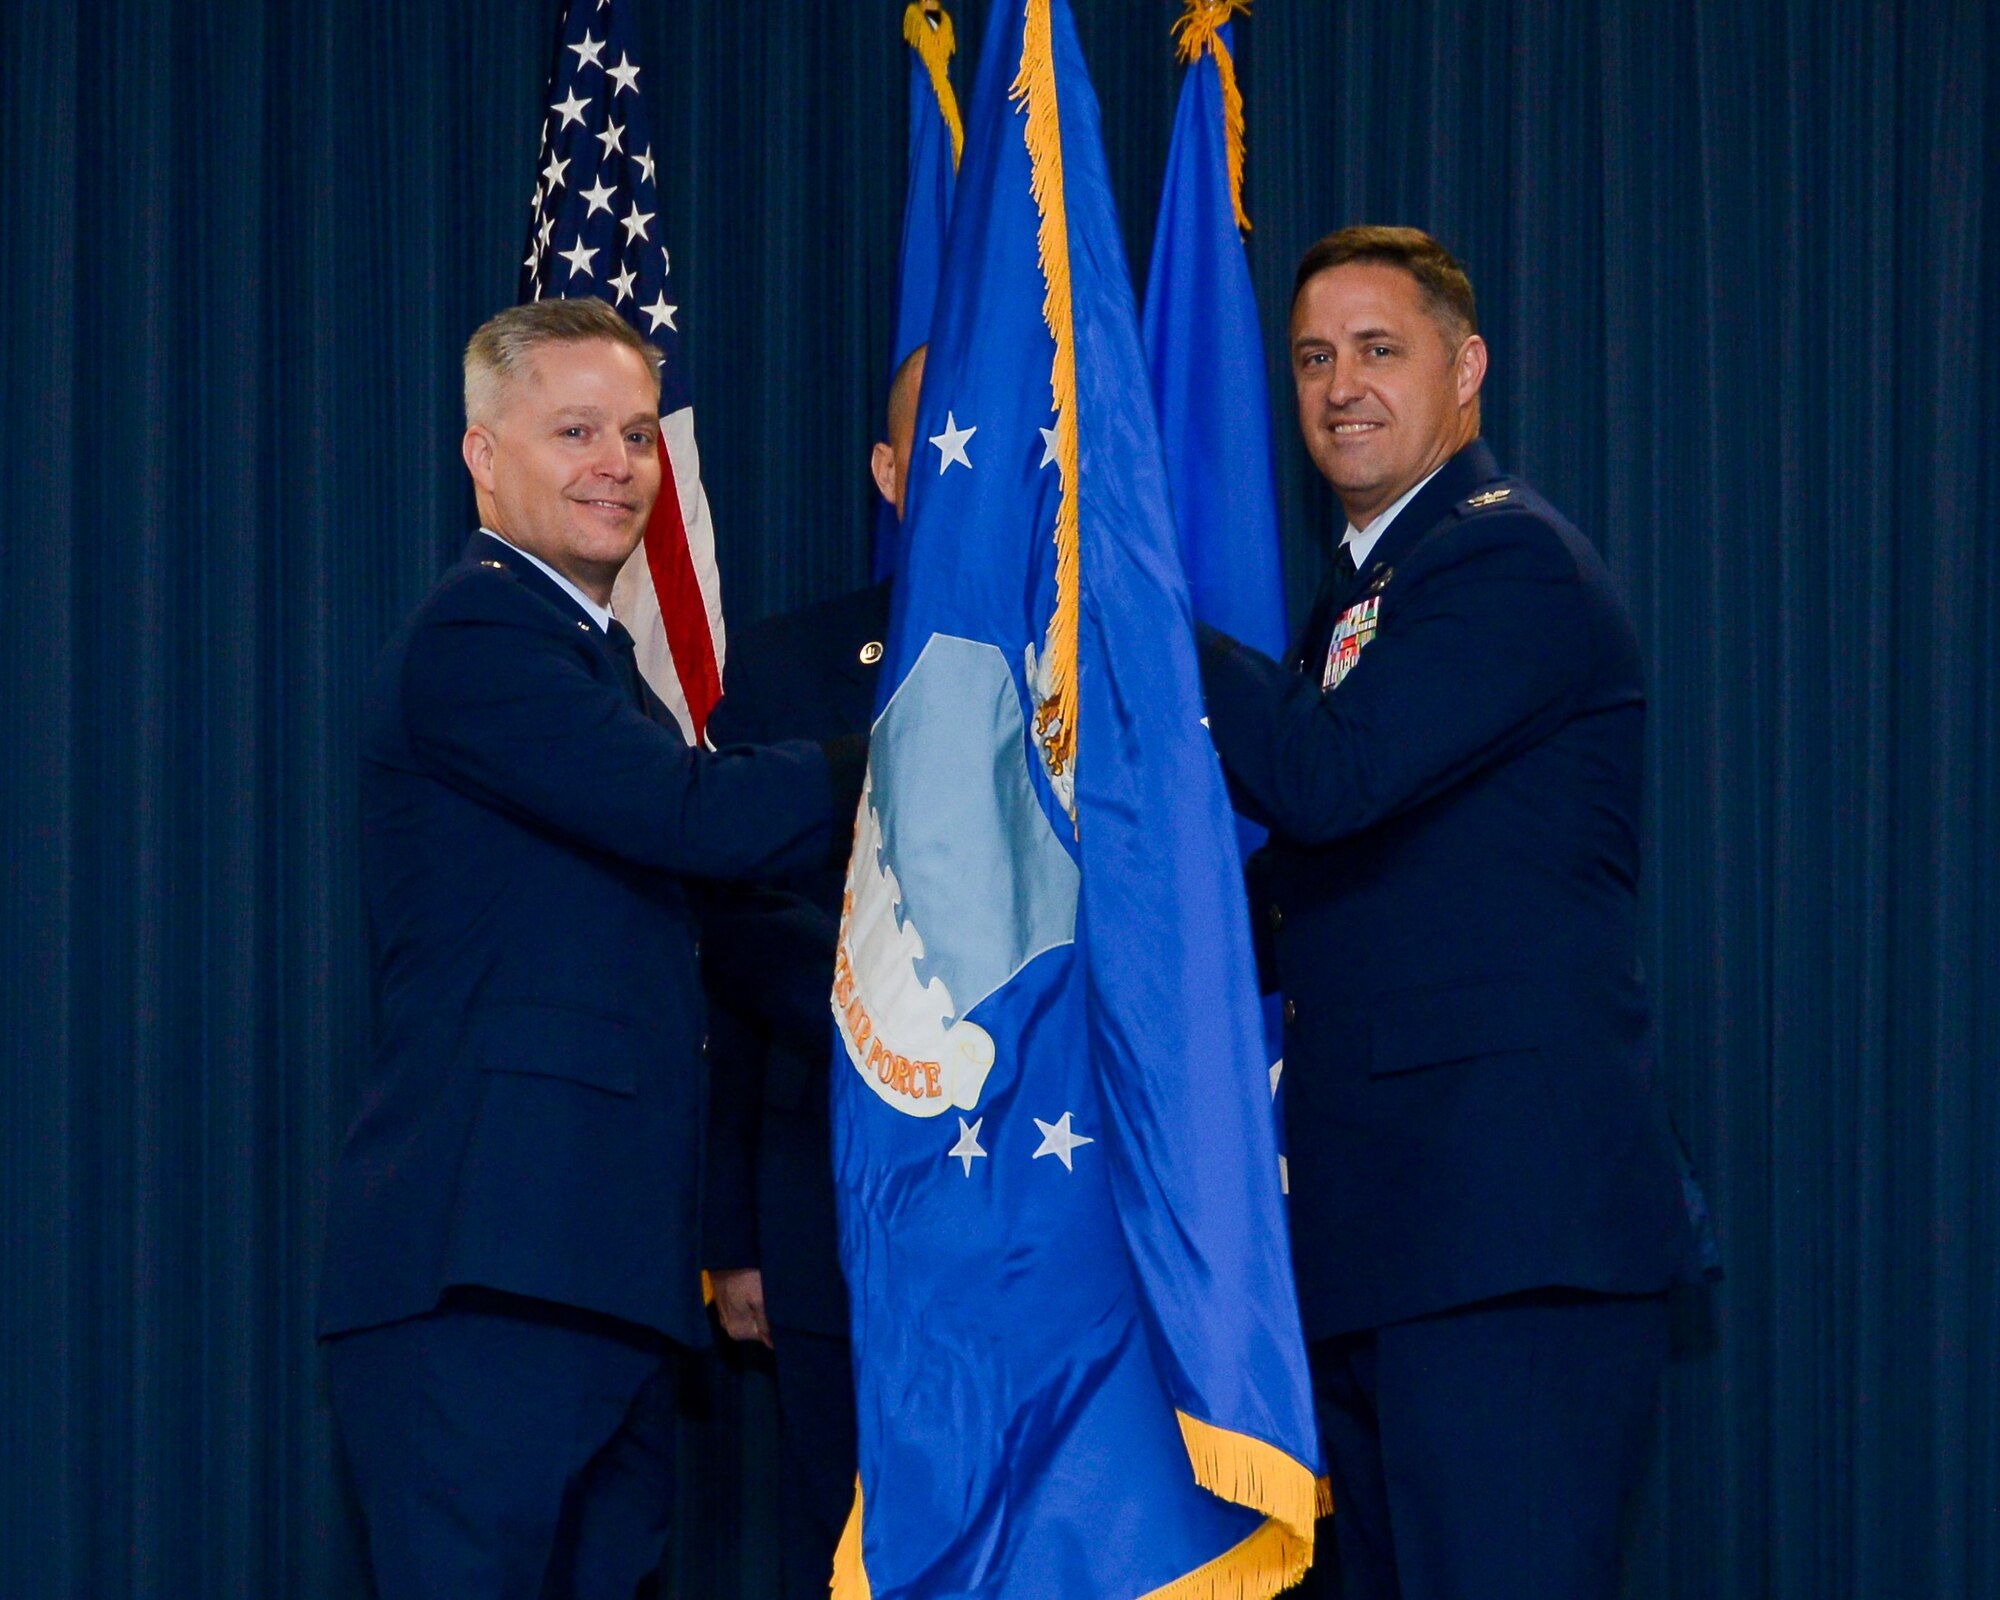 U.S. Air Force Col. James F. Weaver (right) assumes command of the 616th Operations Center from Lt. Gen. Timothy Haugh, Sixteenth Air Force (Air Forces Cyber) commander, during the 616th OC activation ceremony at Joint Base San Antonio-Lackland, Texas, Monday, March 16, 2020.  The new warfighting unit will be responsible for the convergence of the Air Force information warfare enterprise to create new outcomes for the nation.  (U.S. Air Force photo by Sharon Singleton)